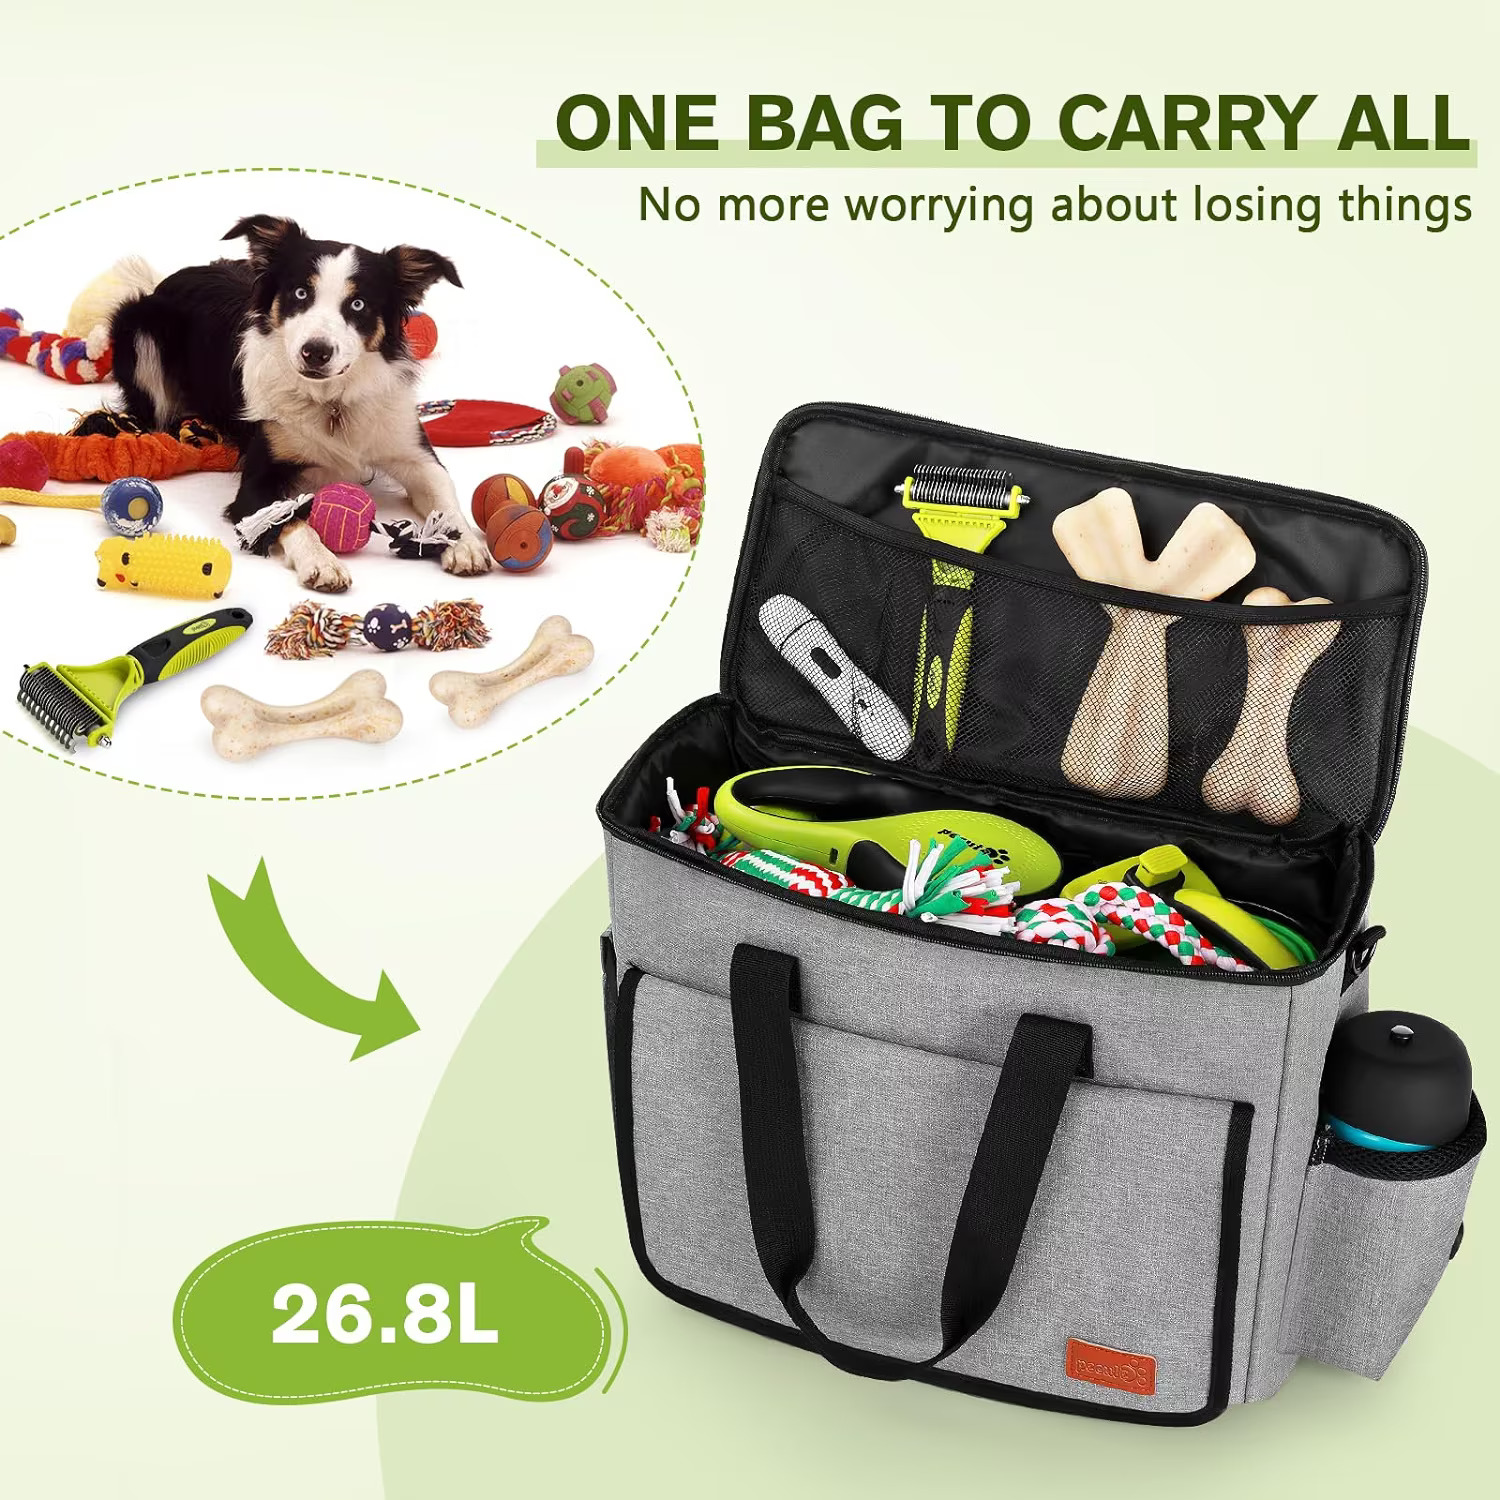 Pecute Pet Travel Bag with Multi-Function Pockets